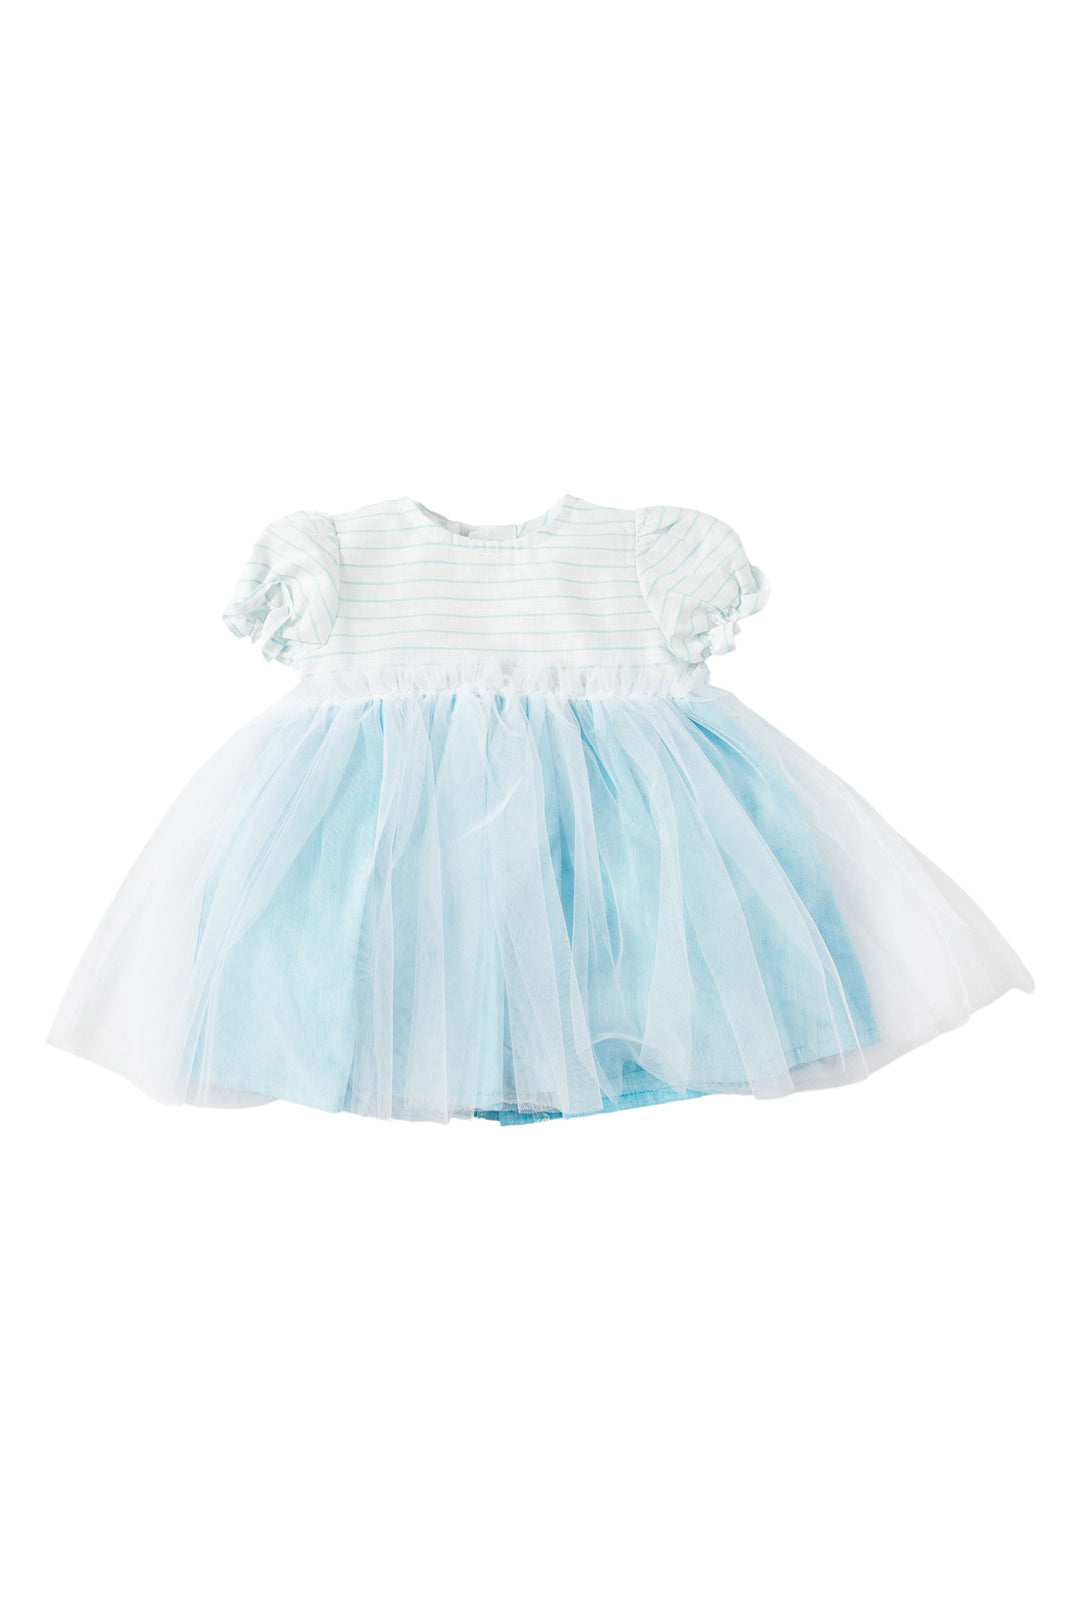 Deolinda "Delphine" Turquoise Striped Tulle Dress | Millie and John